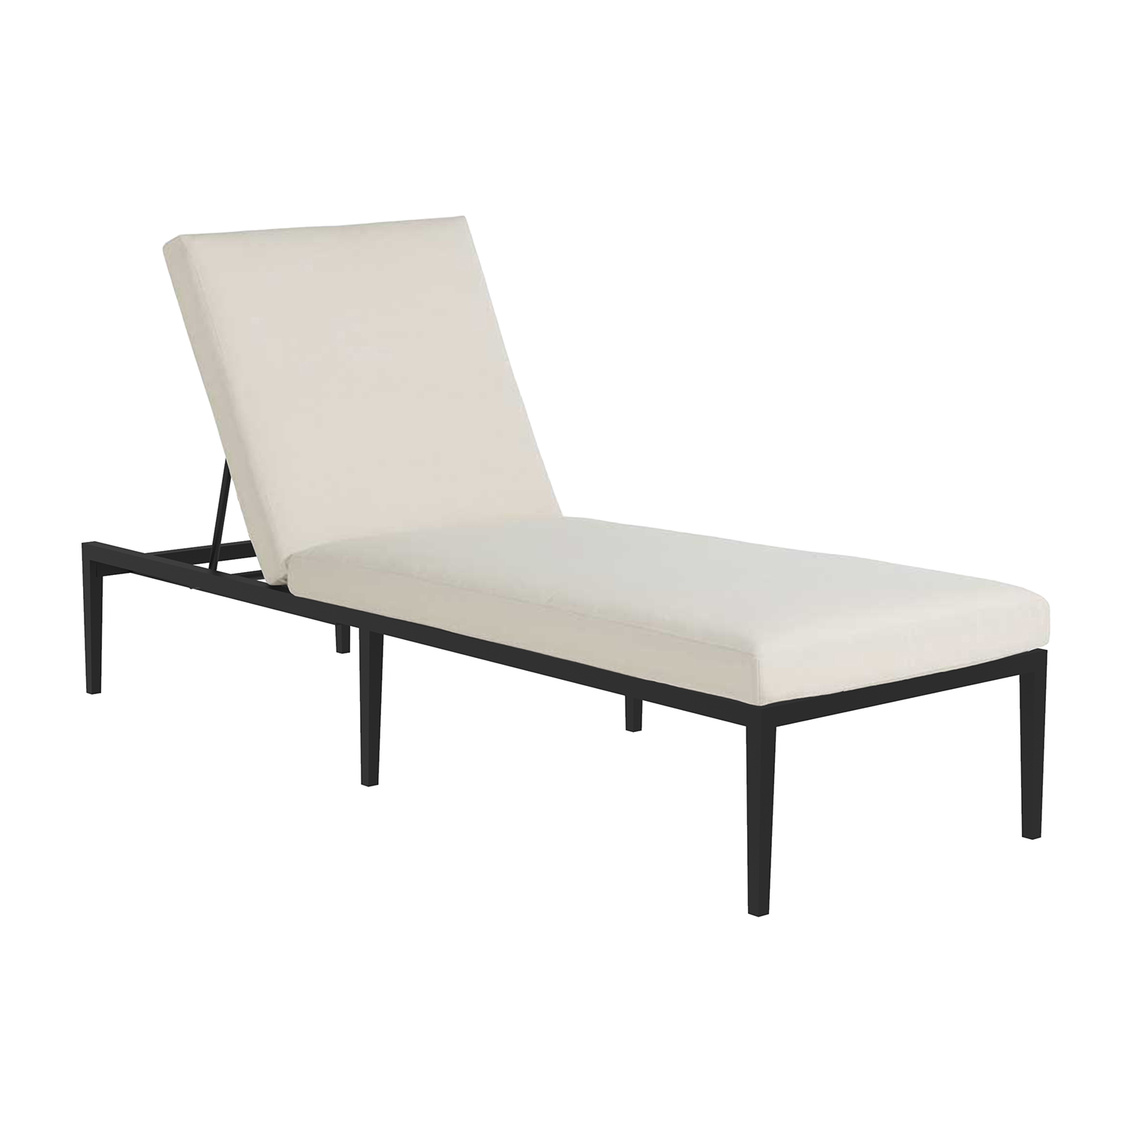 elegante aluminum chaise lounge in midnight – frame only product image